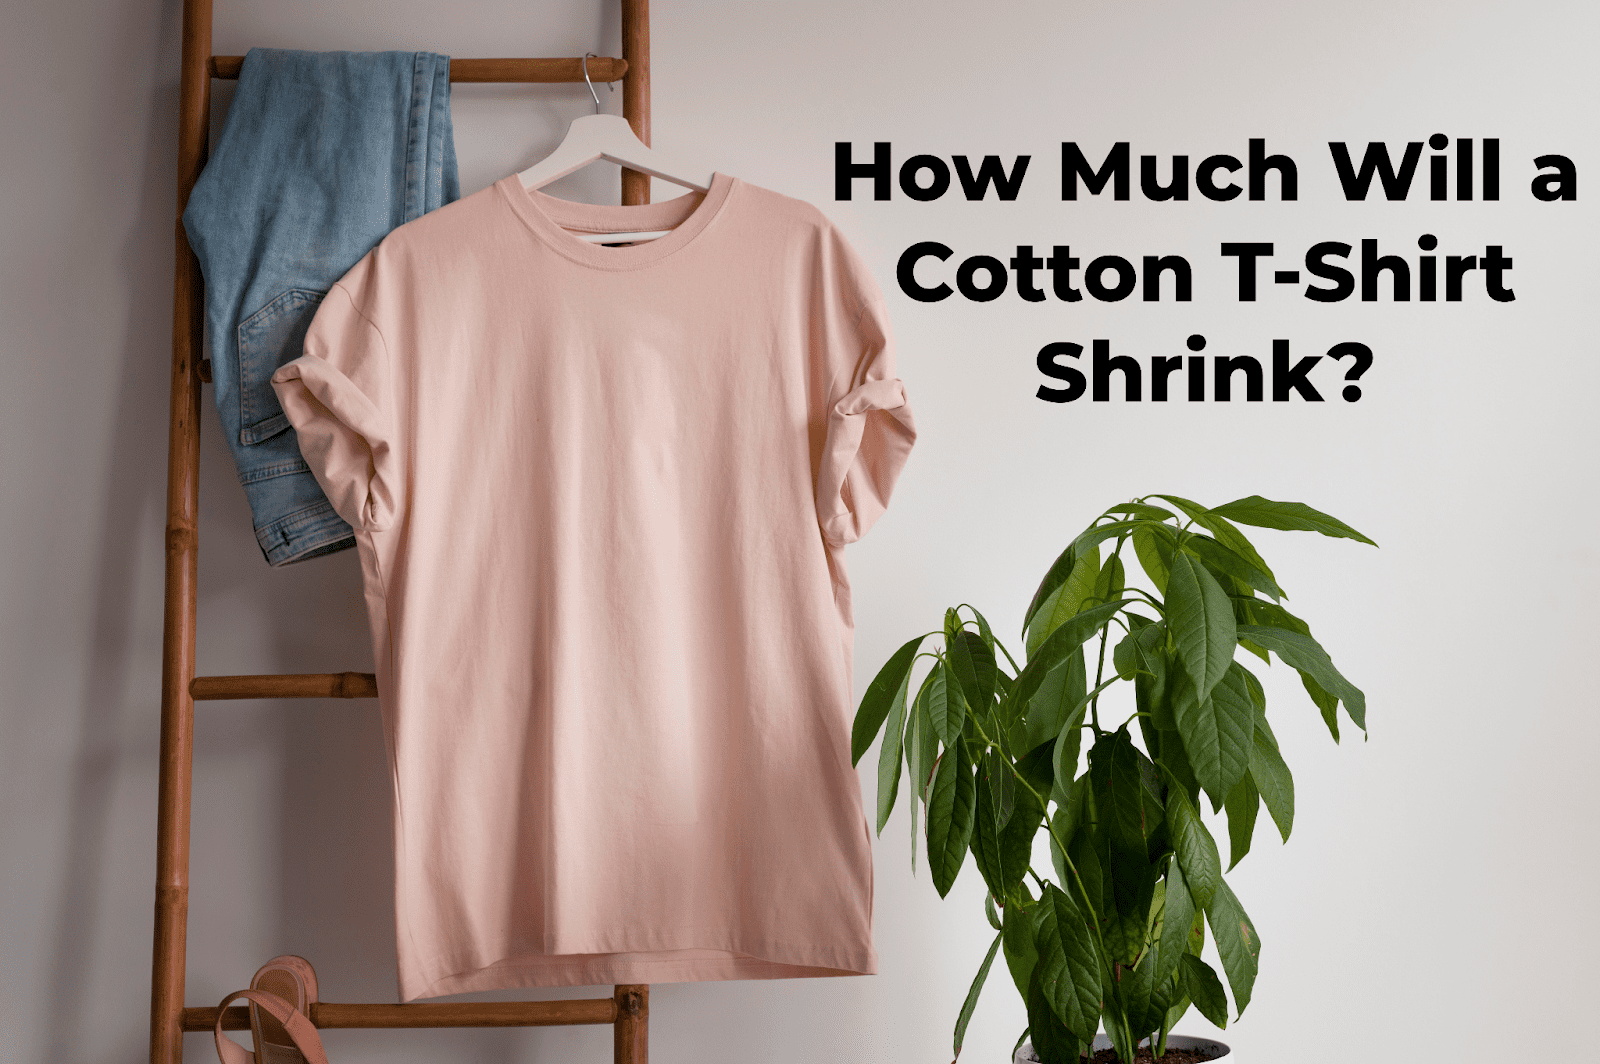 How Much Will a Cotton T-Shirt Shrink?